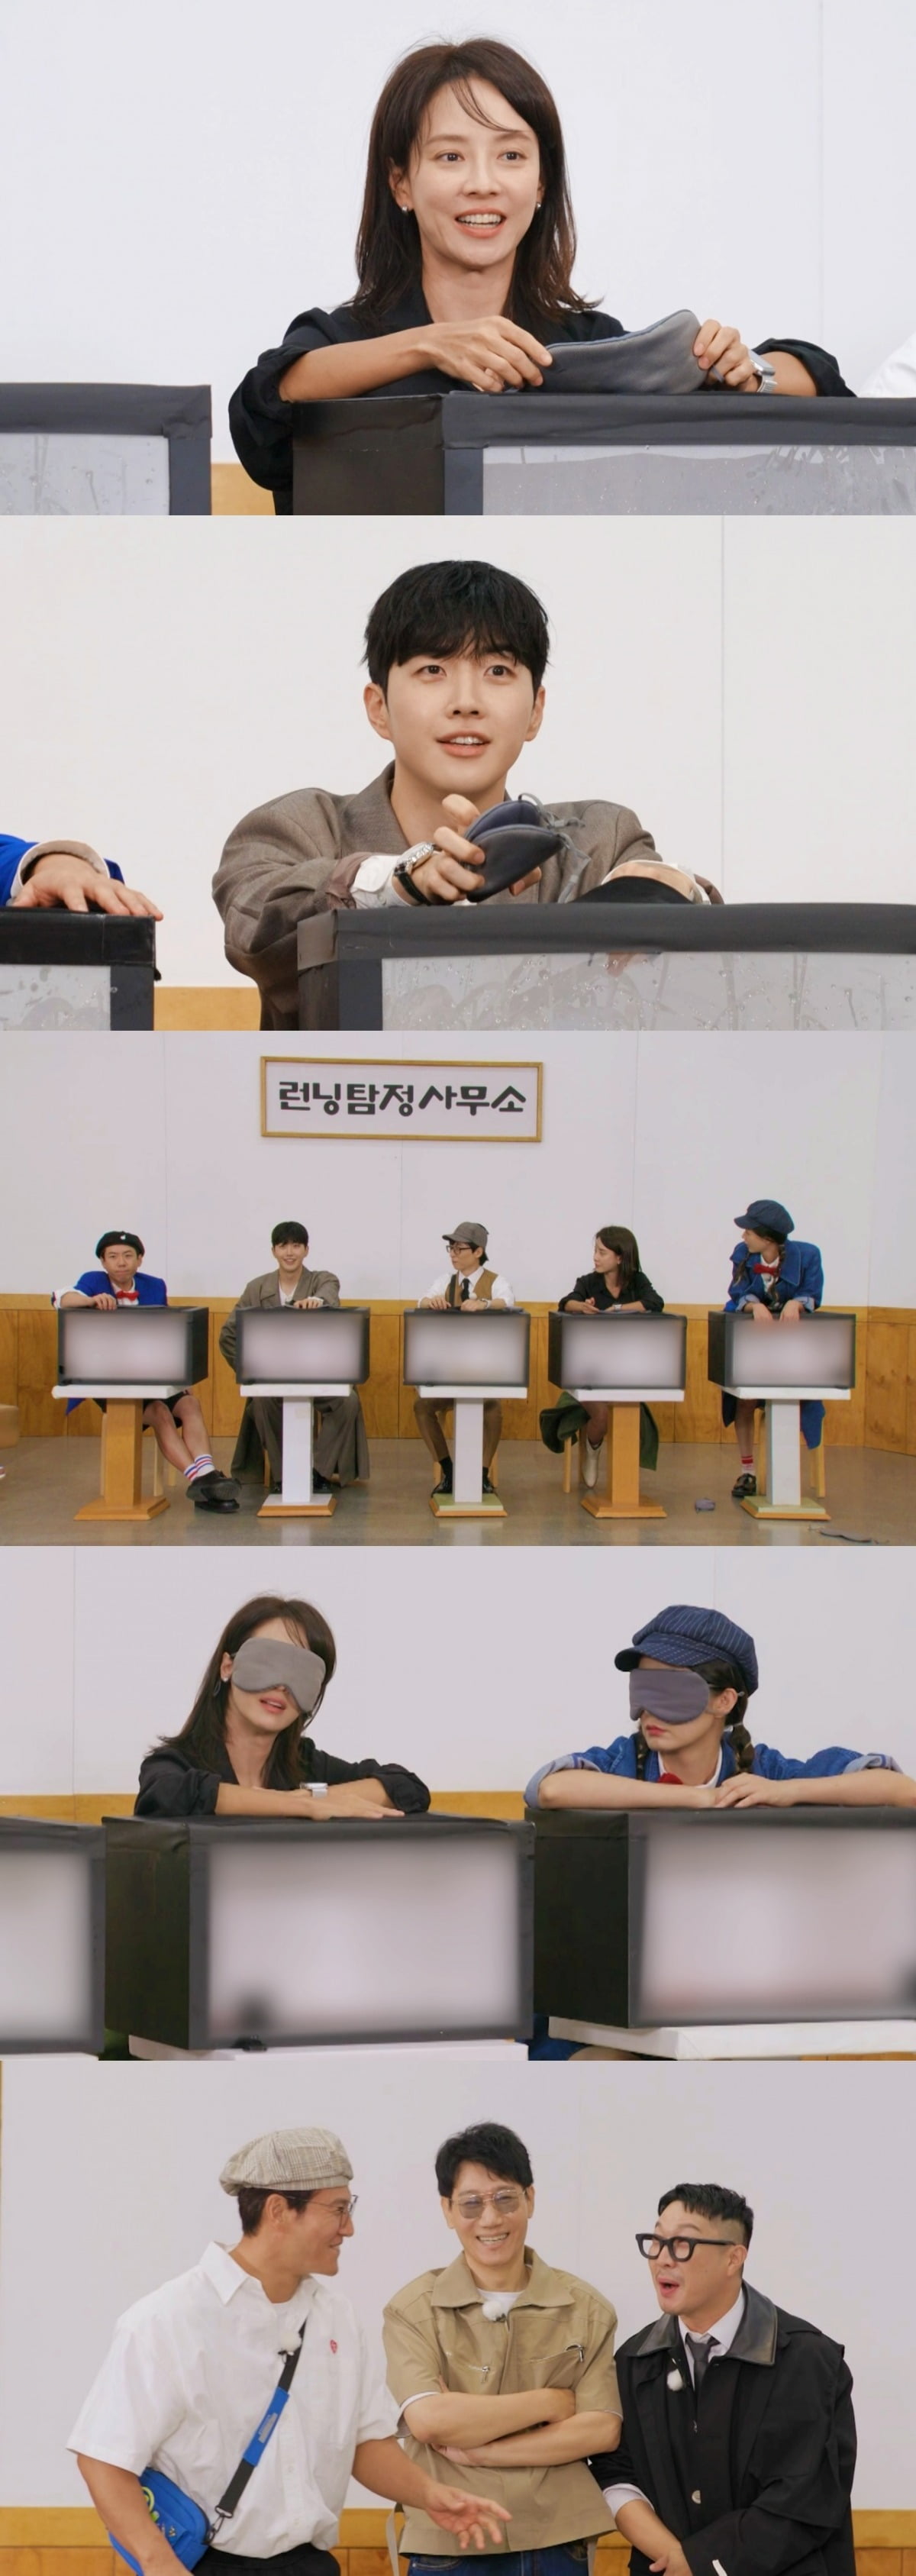 Song Ji-hyo showed a rejection reaction with her whole body